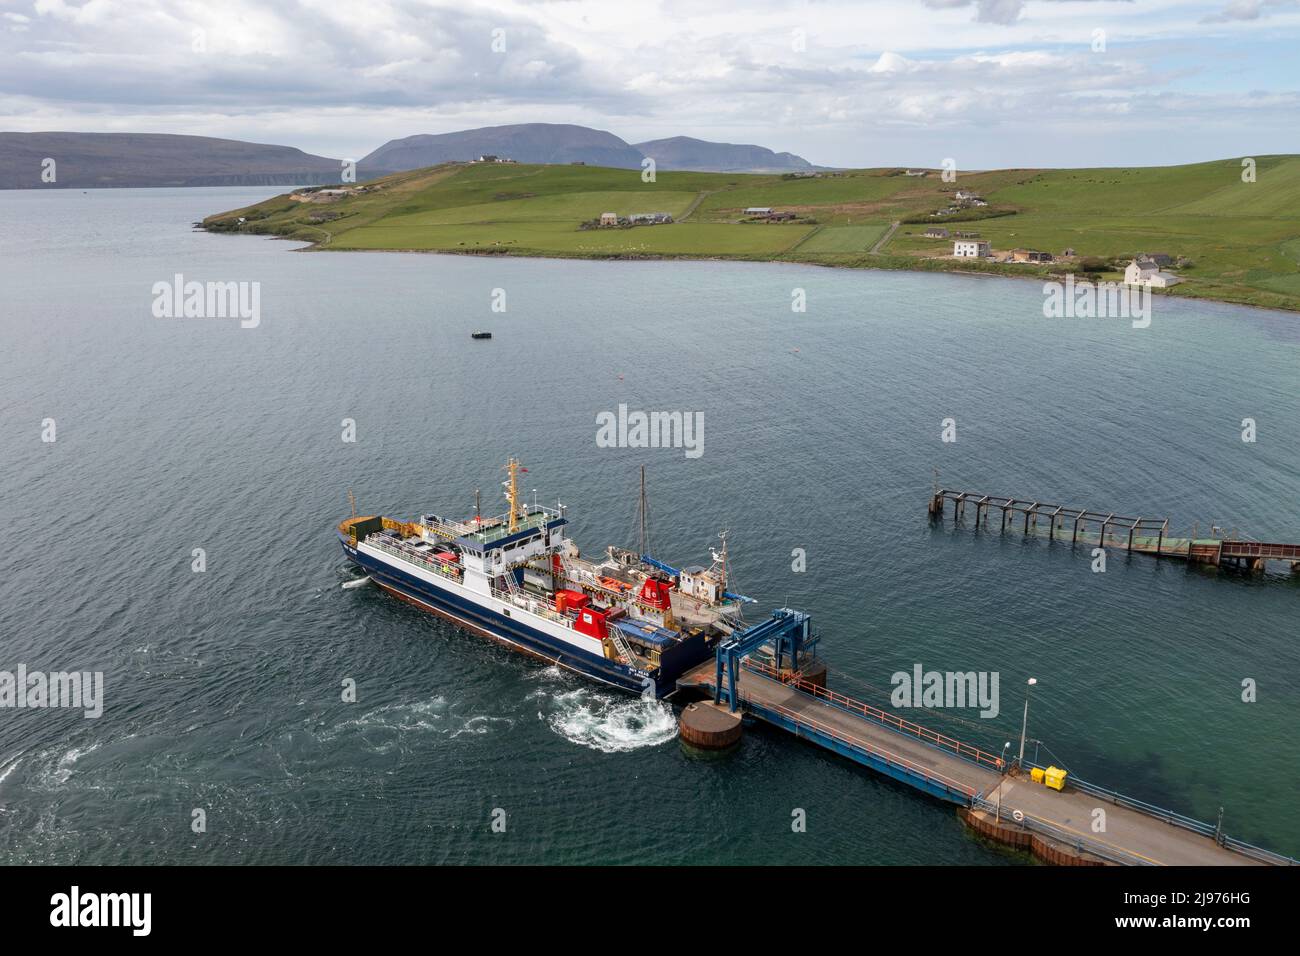 MV Hoy Head ferry departing from Houton Pier, Orkney Mainland, The ferry links the mainland with the islands of Hoy, Flotta and South Walls. Stock Photo